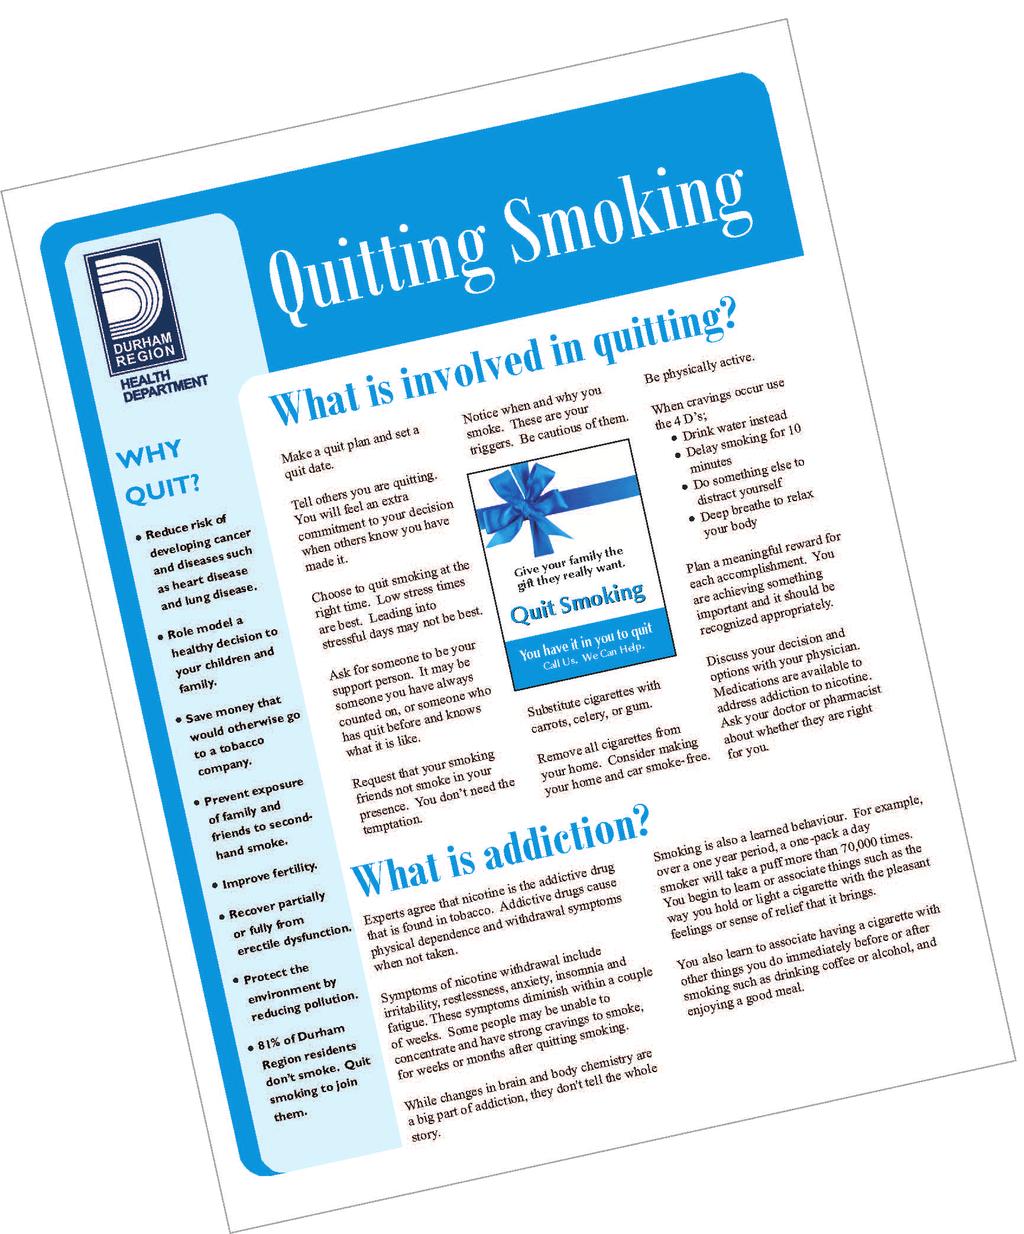 Helping Employees to quit smoking Helping Employees to Quit Smoking Employers can implement the following strategies to assist employees who wish to quit smoking: Provide resources about quitting